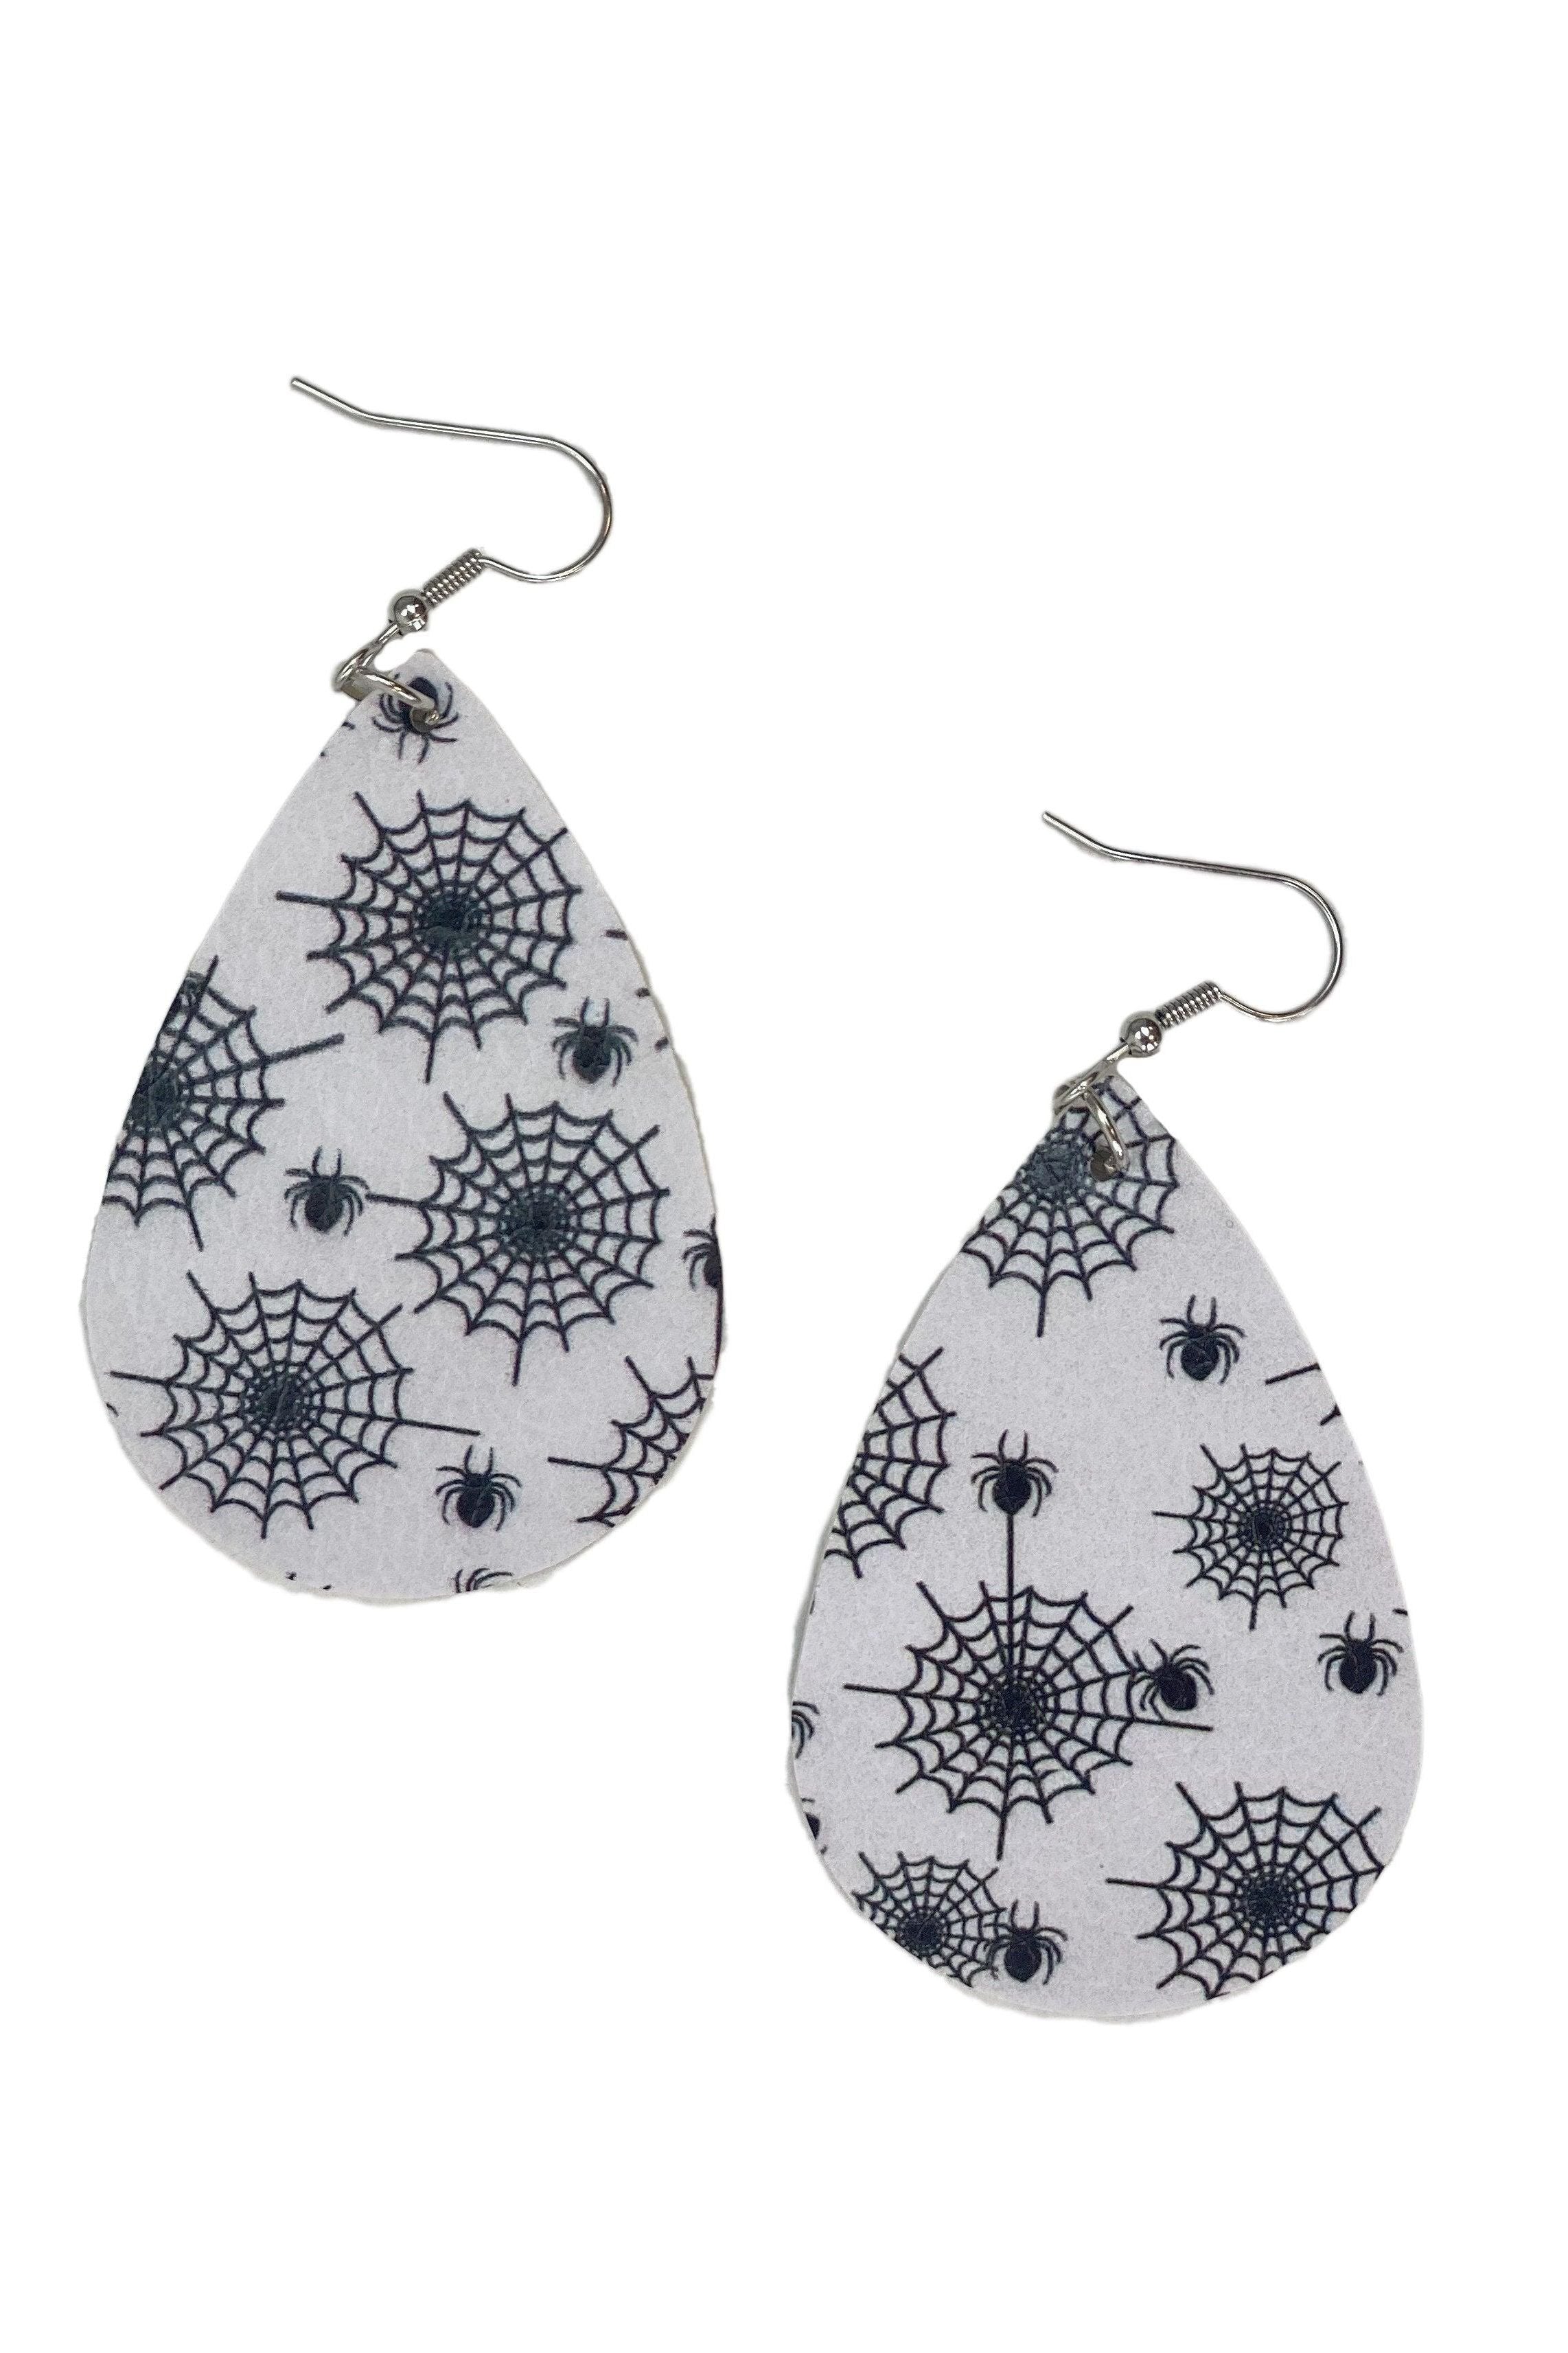 Caught In Your Web Teardrop Leather Earrings  Boutique Simplified   